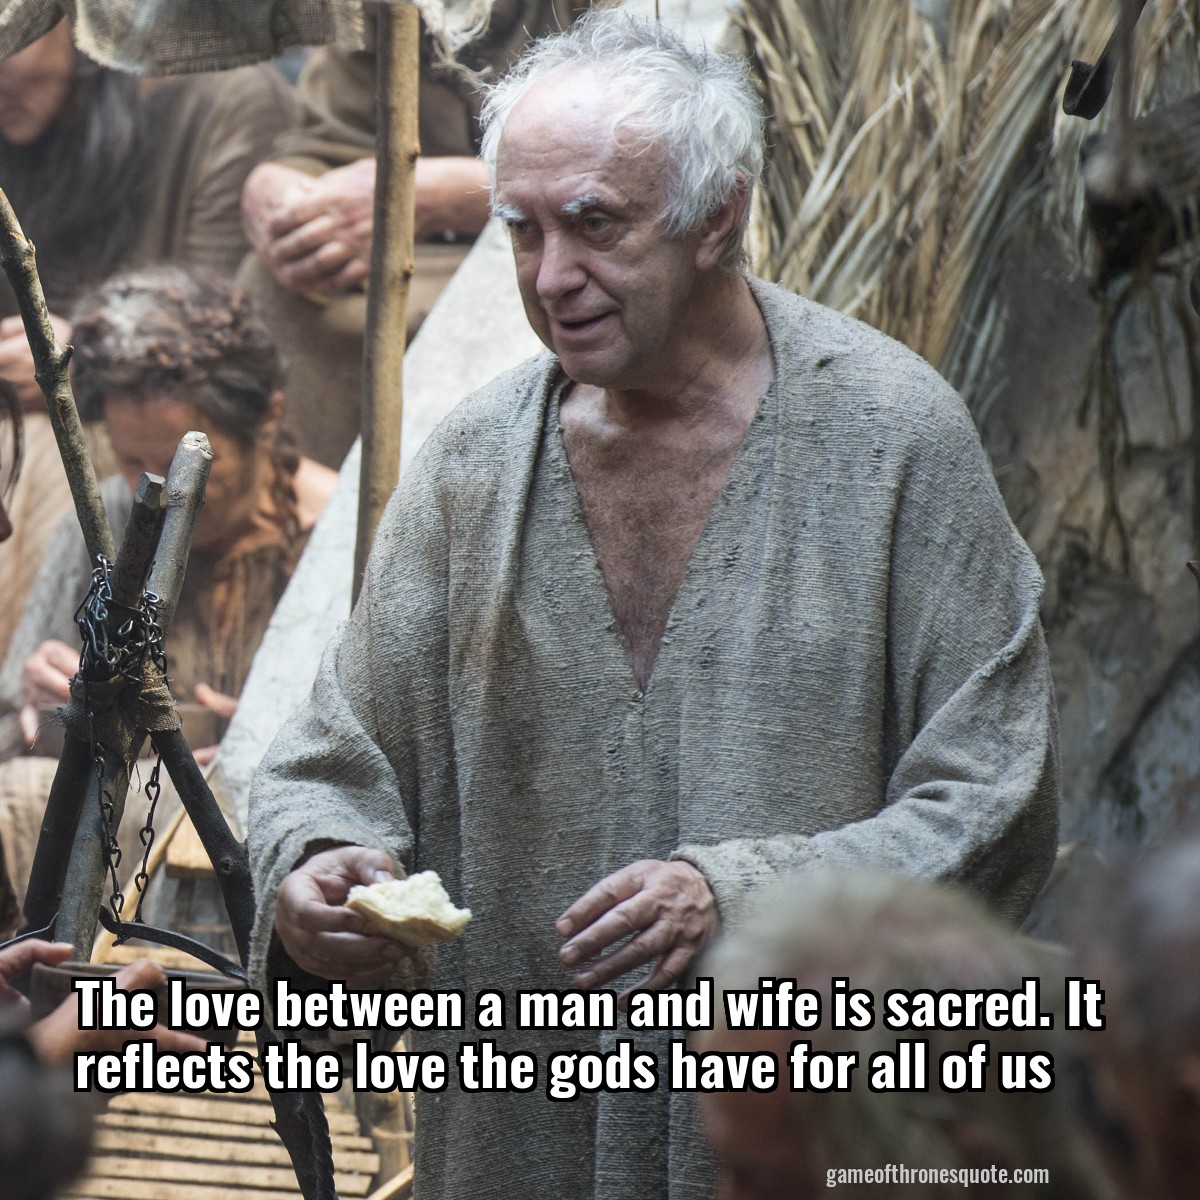 The love between a man and wife is sacred. It reflects the love the gods have for all of us